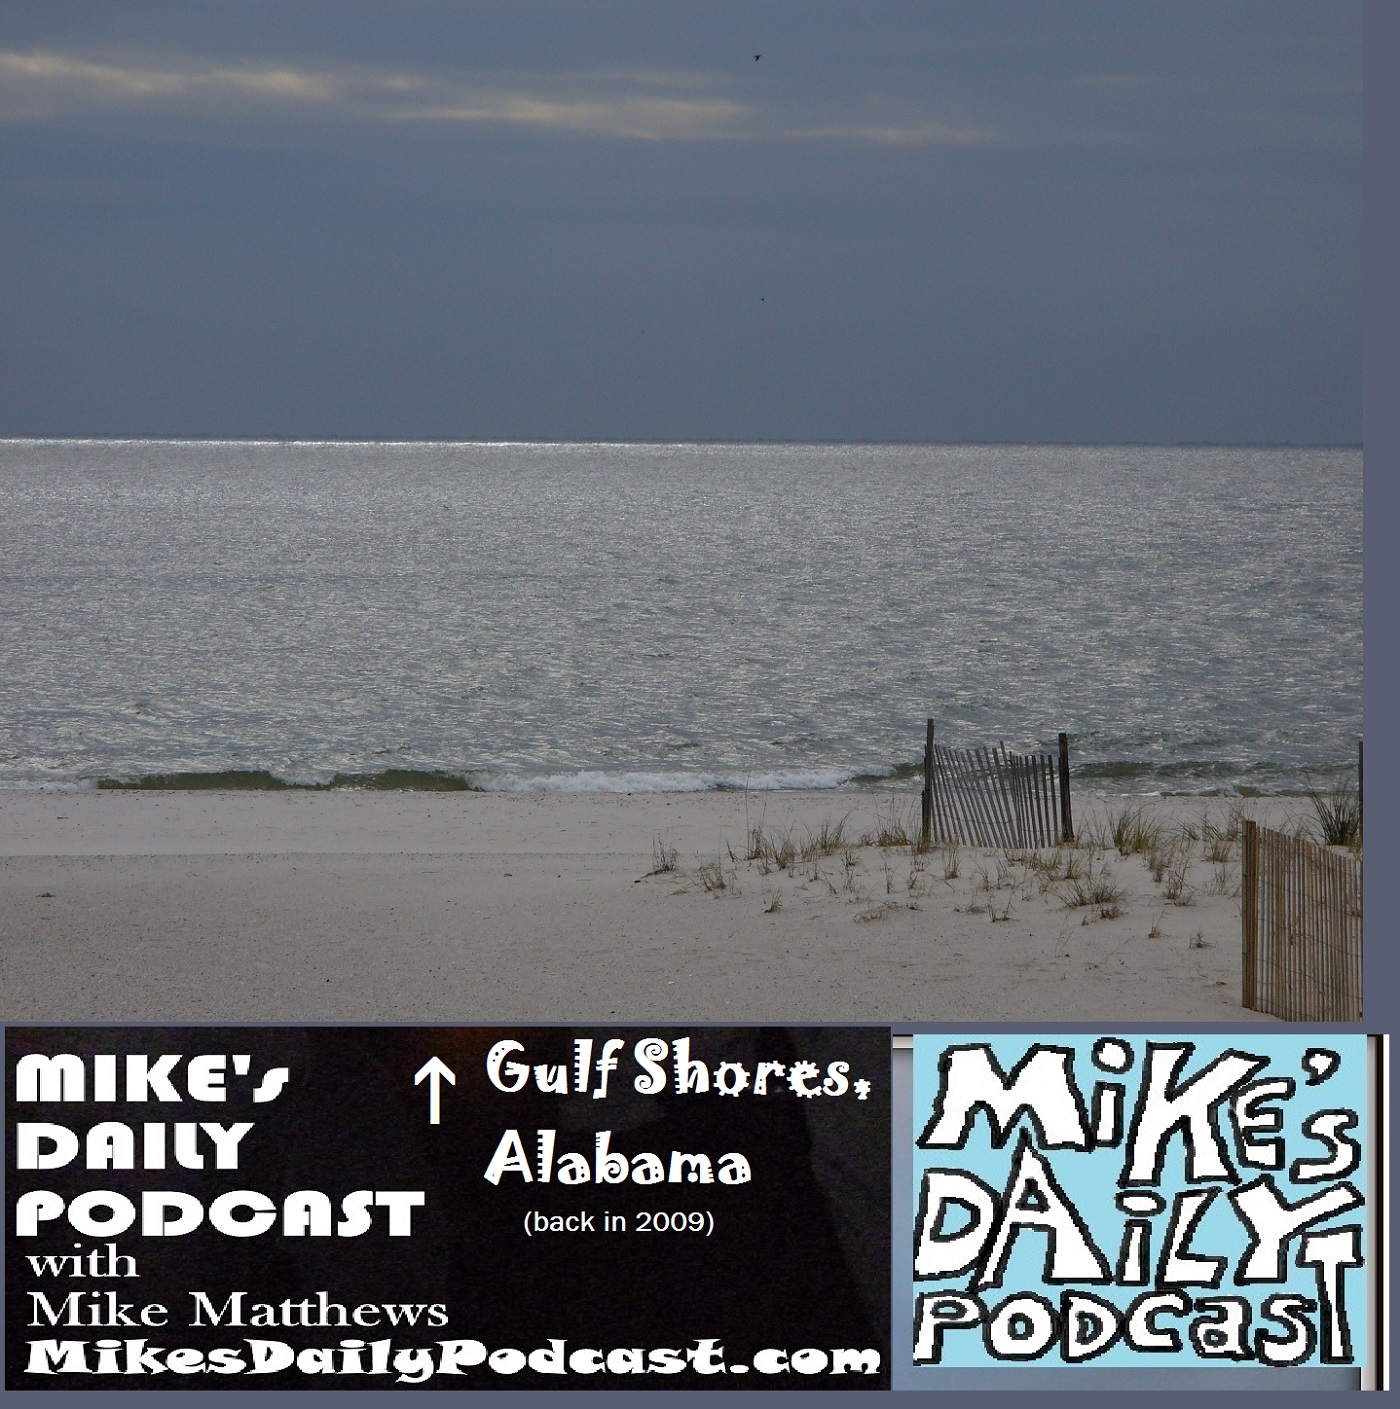 mikes-daily-podcast-1176-gulf-shores-alabama